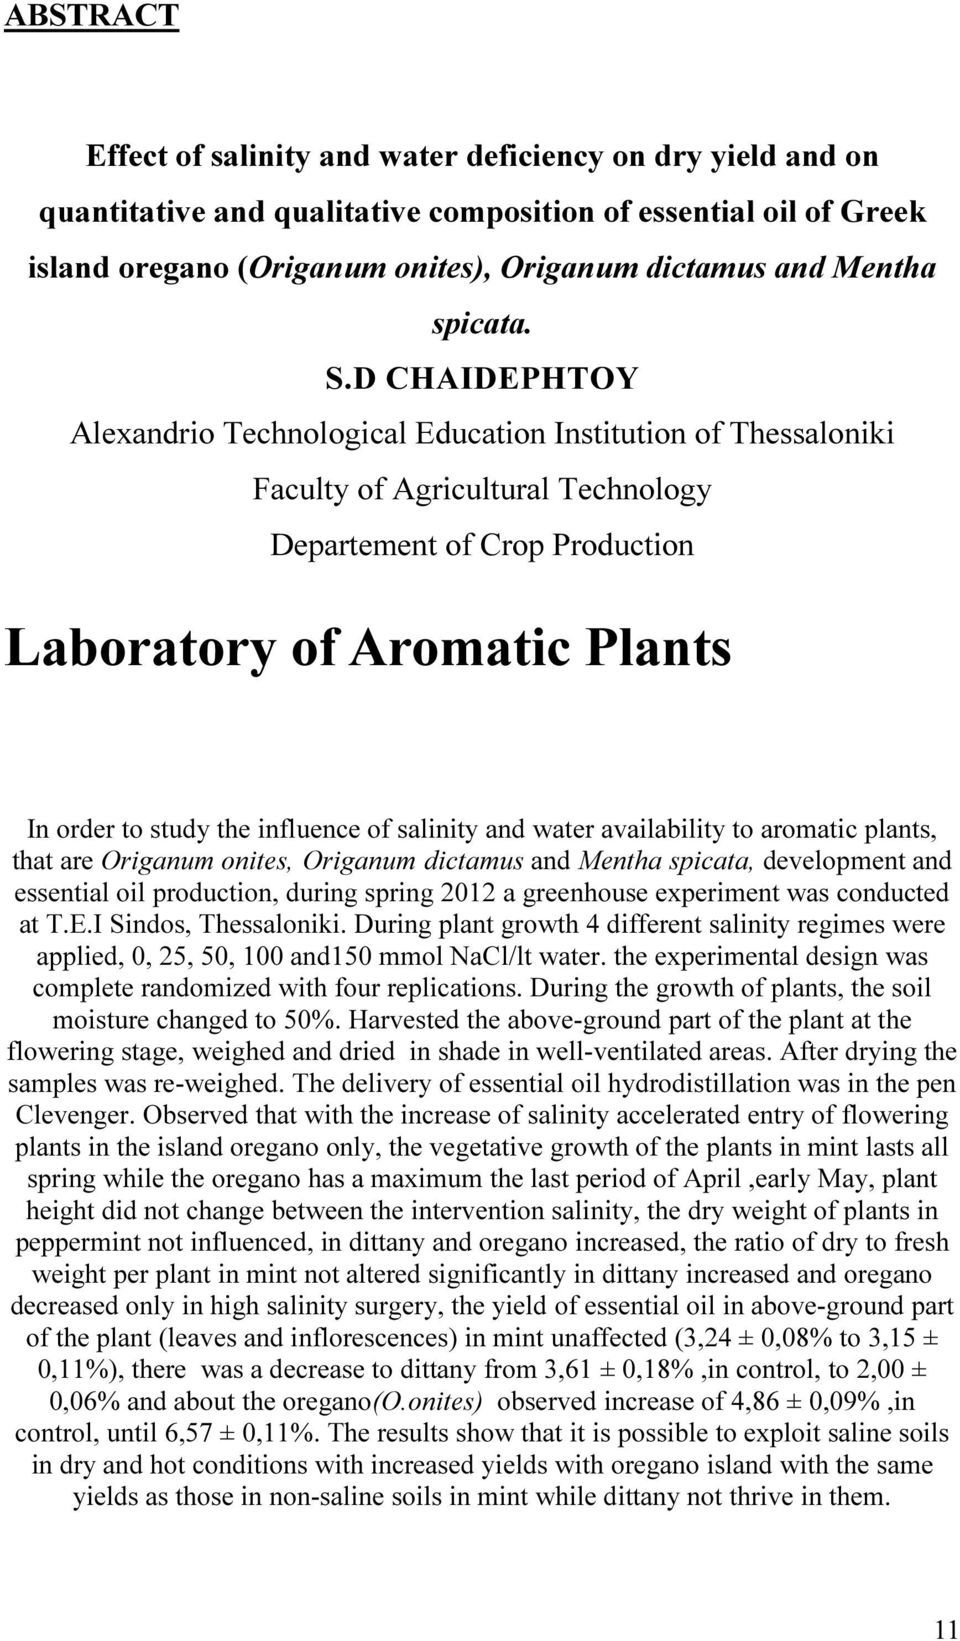 D CHAIDEPHTOY Alexandrio Technological Education Institution of Thessaloniki Faculty of Agricultural Technology Departement of Crop Production Laboratory of Aromatic Plants In order to study the